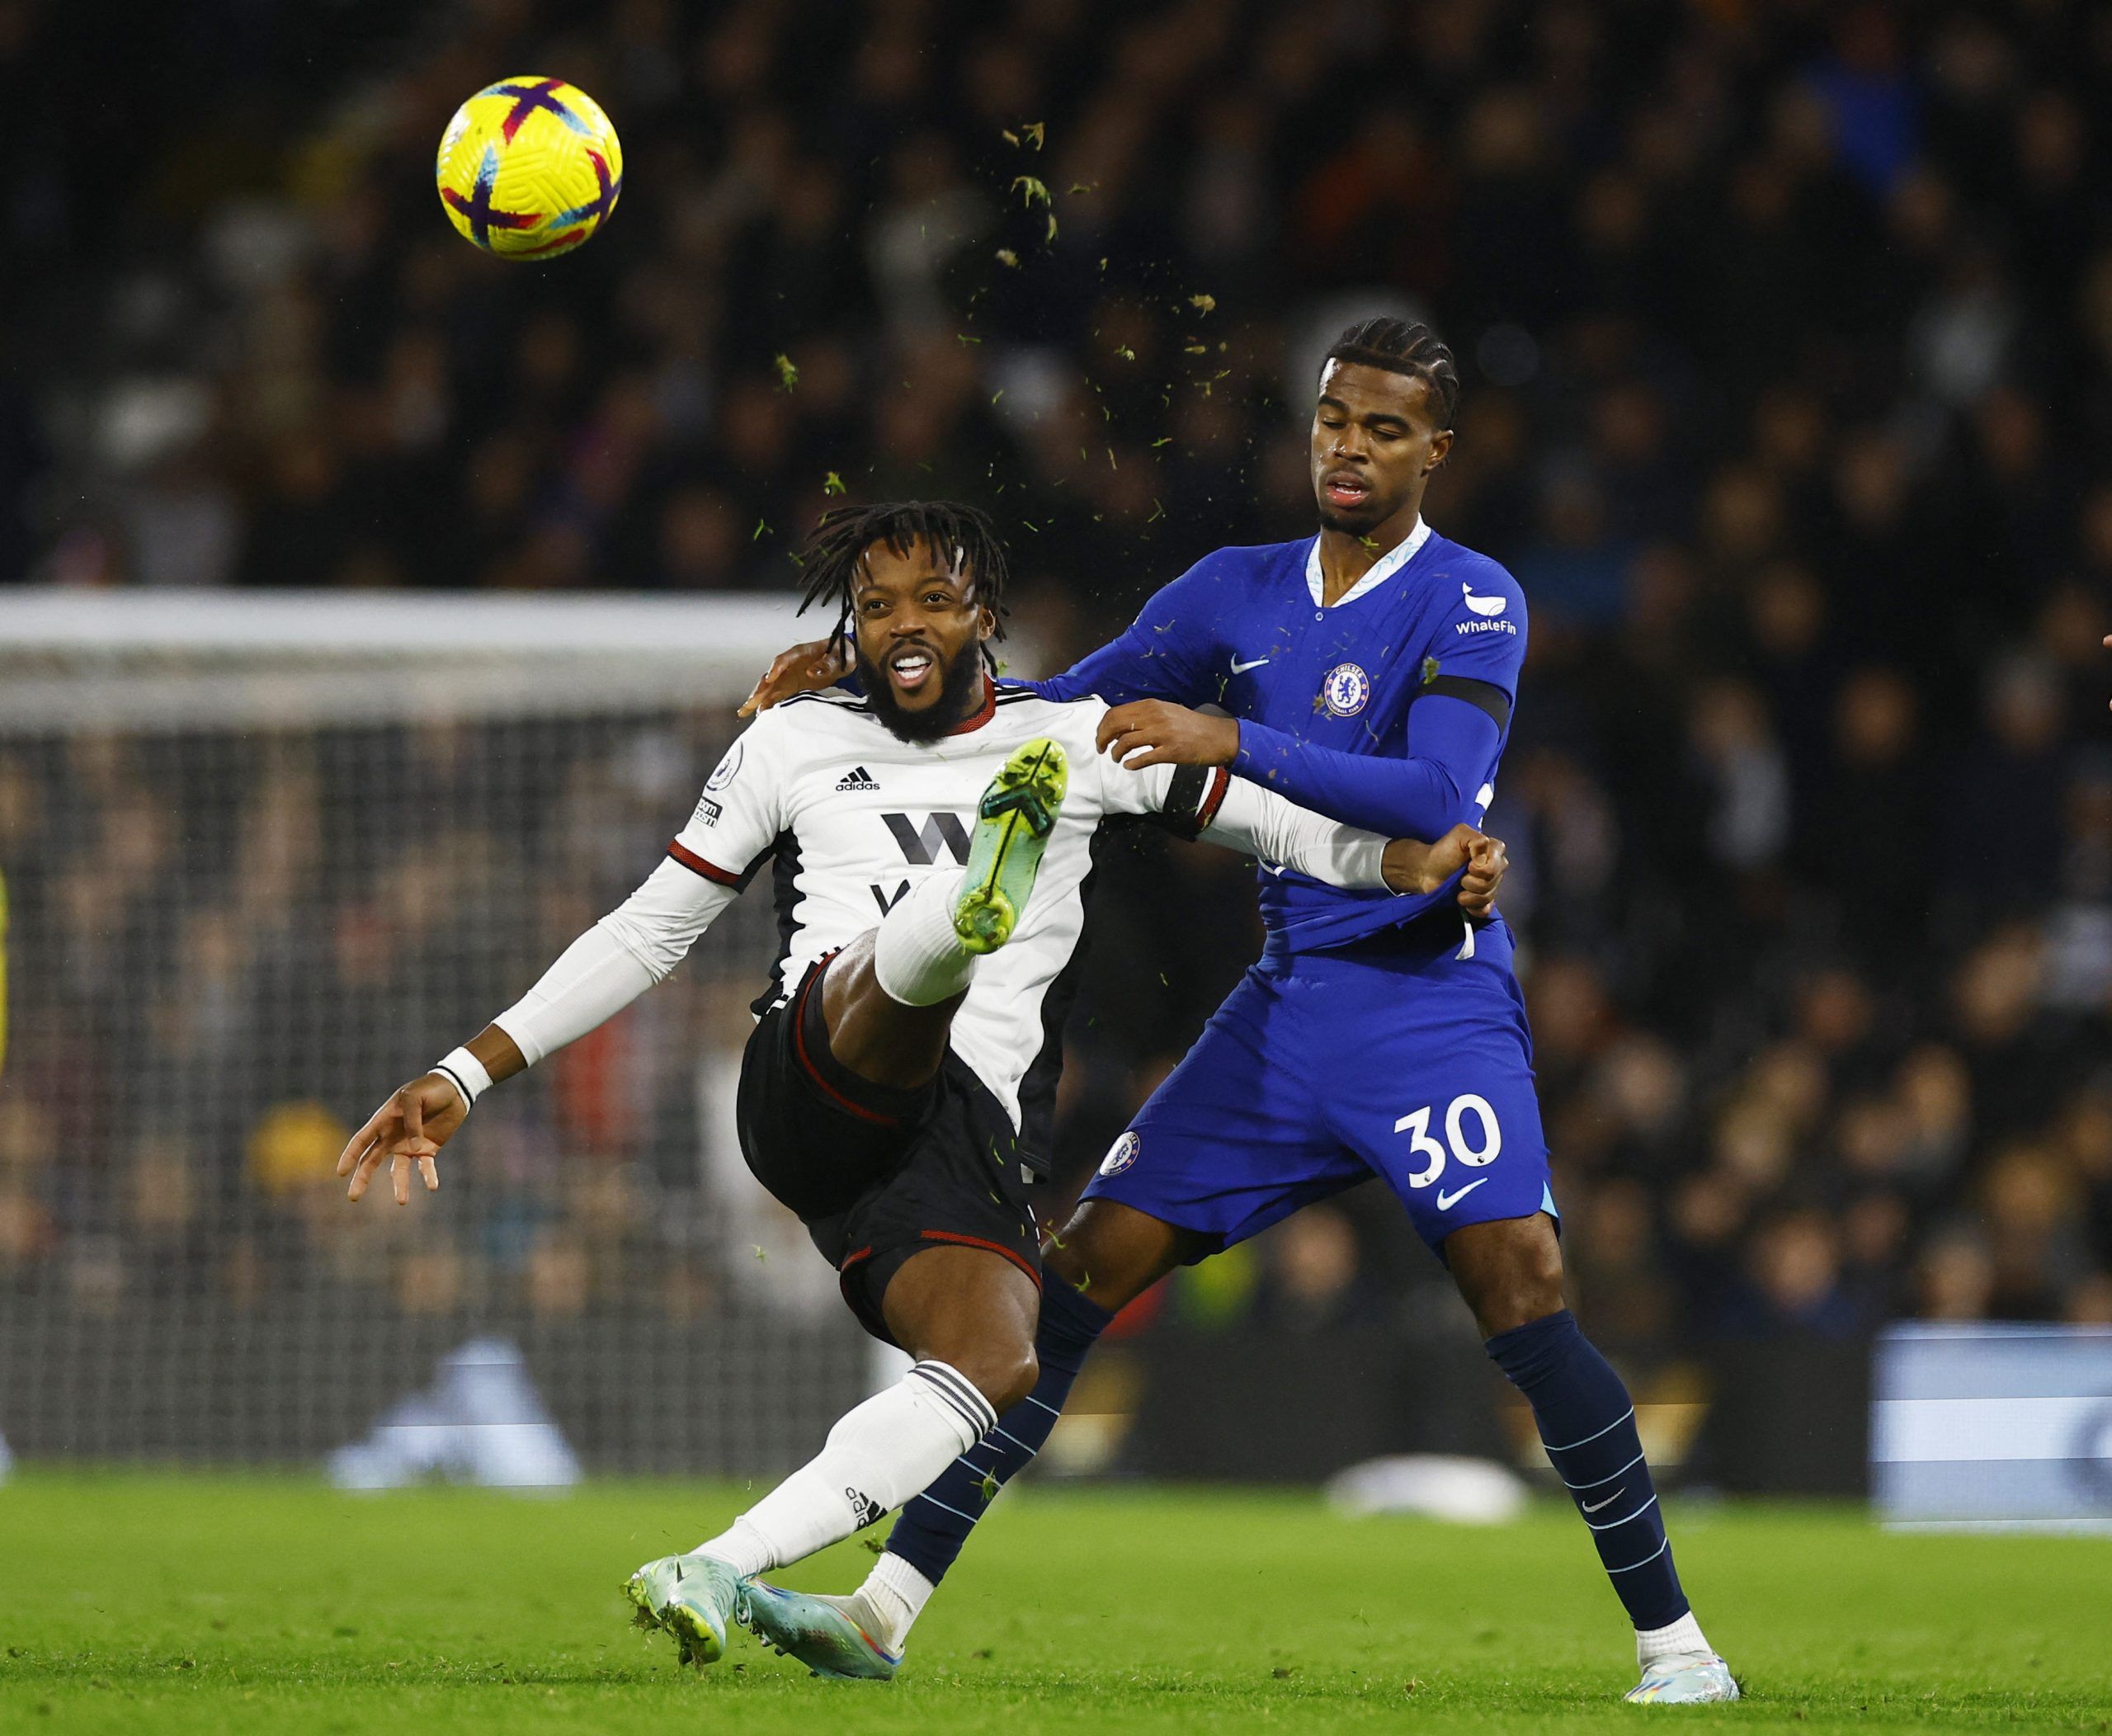 Soccer Football - Premier League - Fulham v Chelsea - Craven Cottage, London, Britain - January 12, 2023 Fulham's Nathaniel Chalobah in action with Chelsea's Carney Chukwuemeka Action Images via Reuters/Peter Cziborra EDITORIAL USE ONLY. No use with unauthorized audio, video, data, fixture lists, club/league logos or 'live' services. Online in-match use limited to 75 images, no video emulation. No use in betting, games or single club /league/player publications.  Please contact your account repr